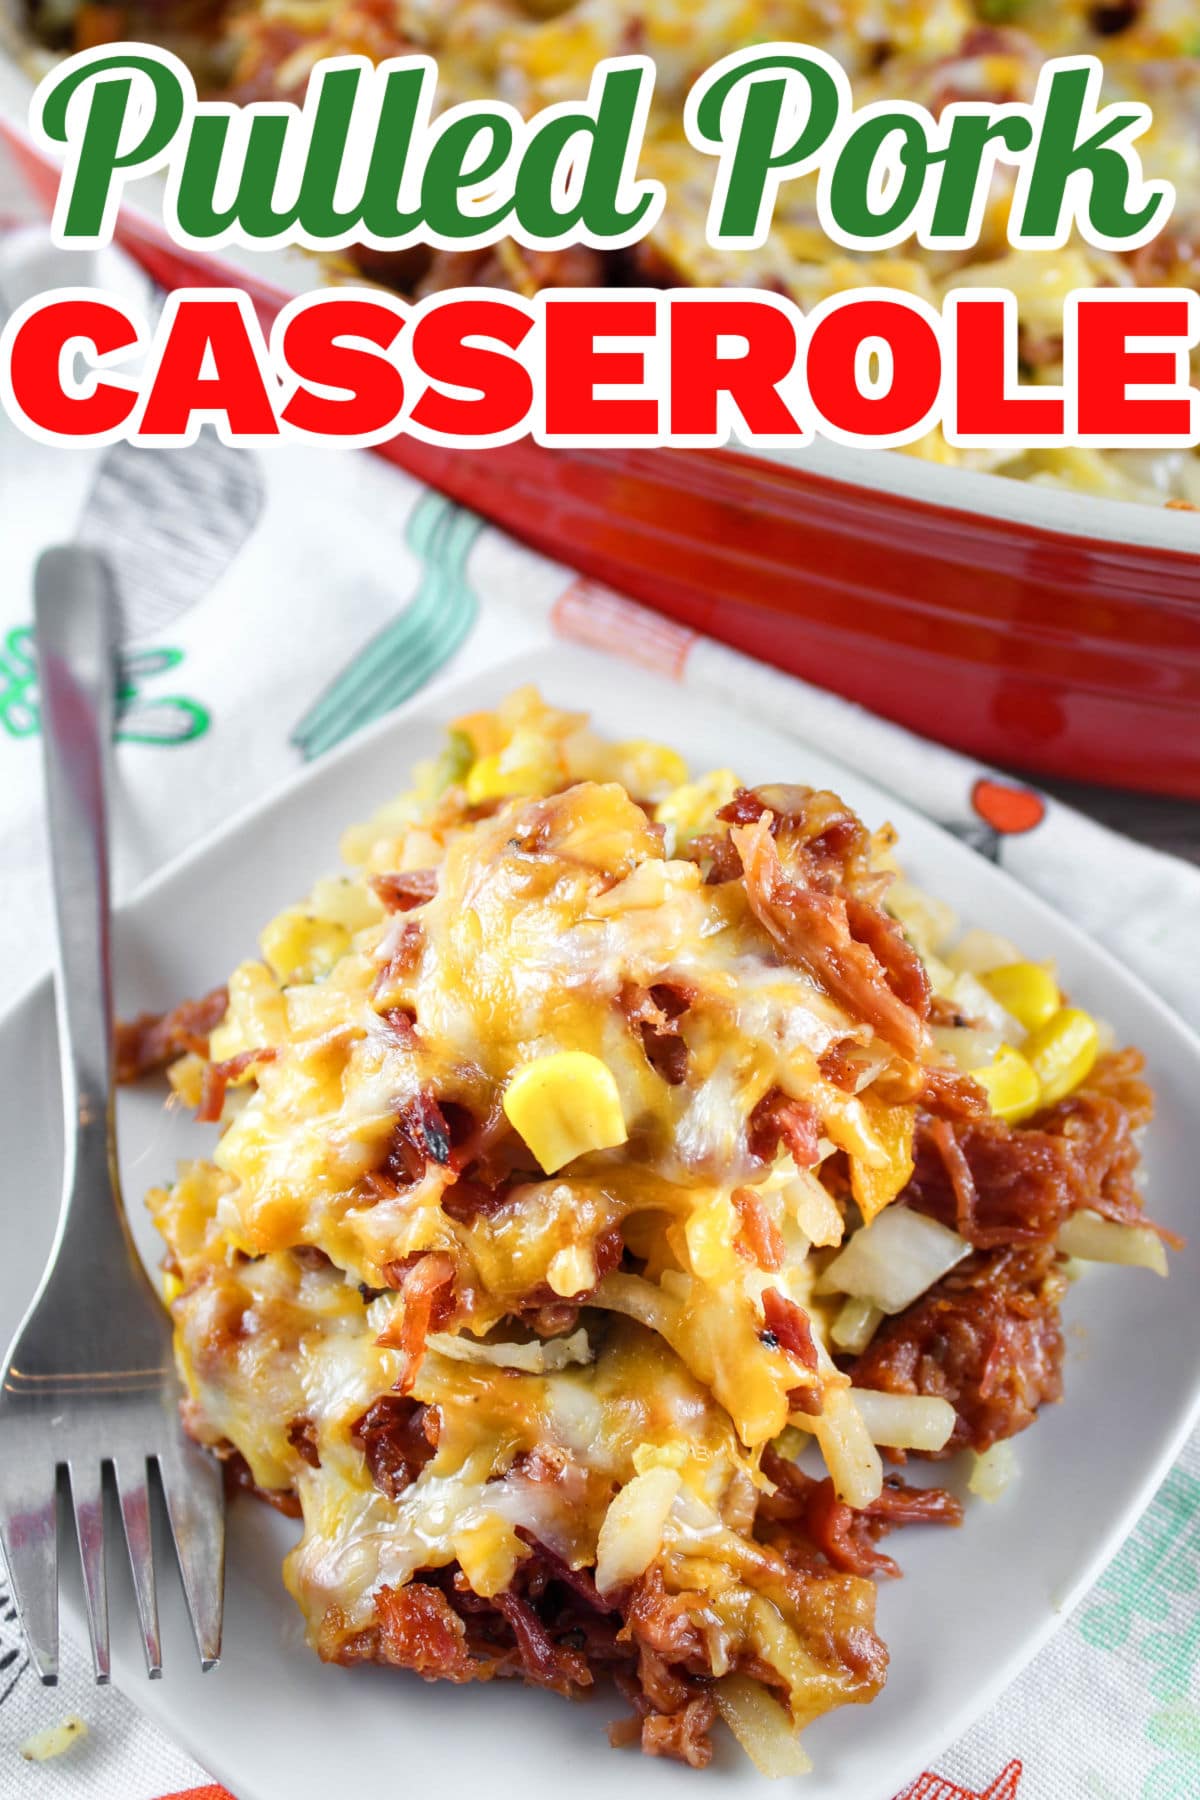 This Pulled Pork Casserole is one of those comfort food classic recipes! You've got loaded hashbrowns PLUS juicy pulled pork and top it all off with cheese! I couldn't get enough! It's also super easy to make - which is always helpful on a weeknight when you don't want to spend all night in the kitchen. via @foodhussy